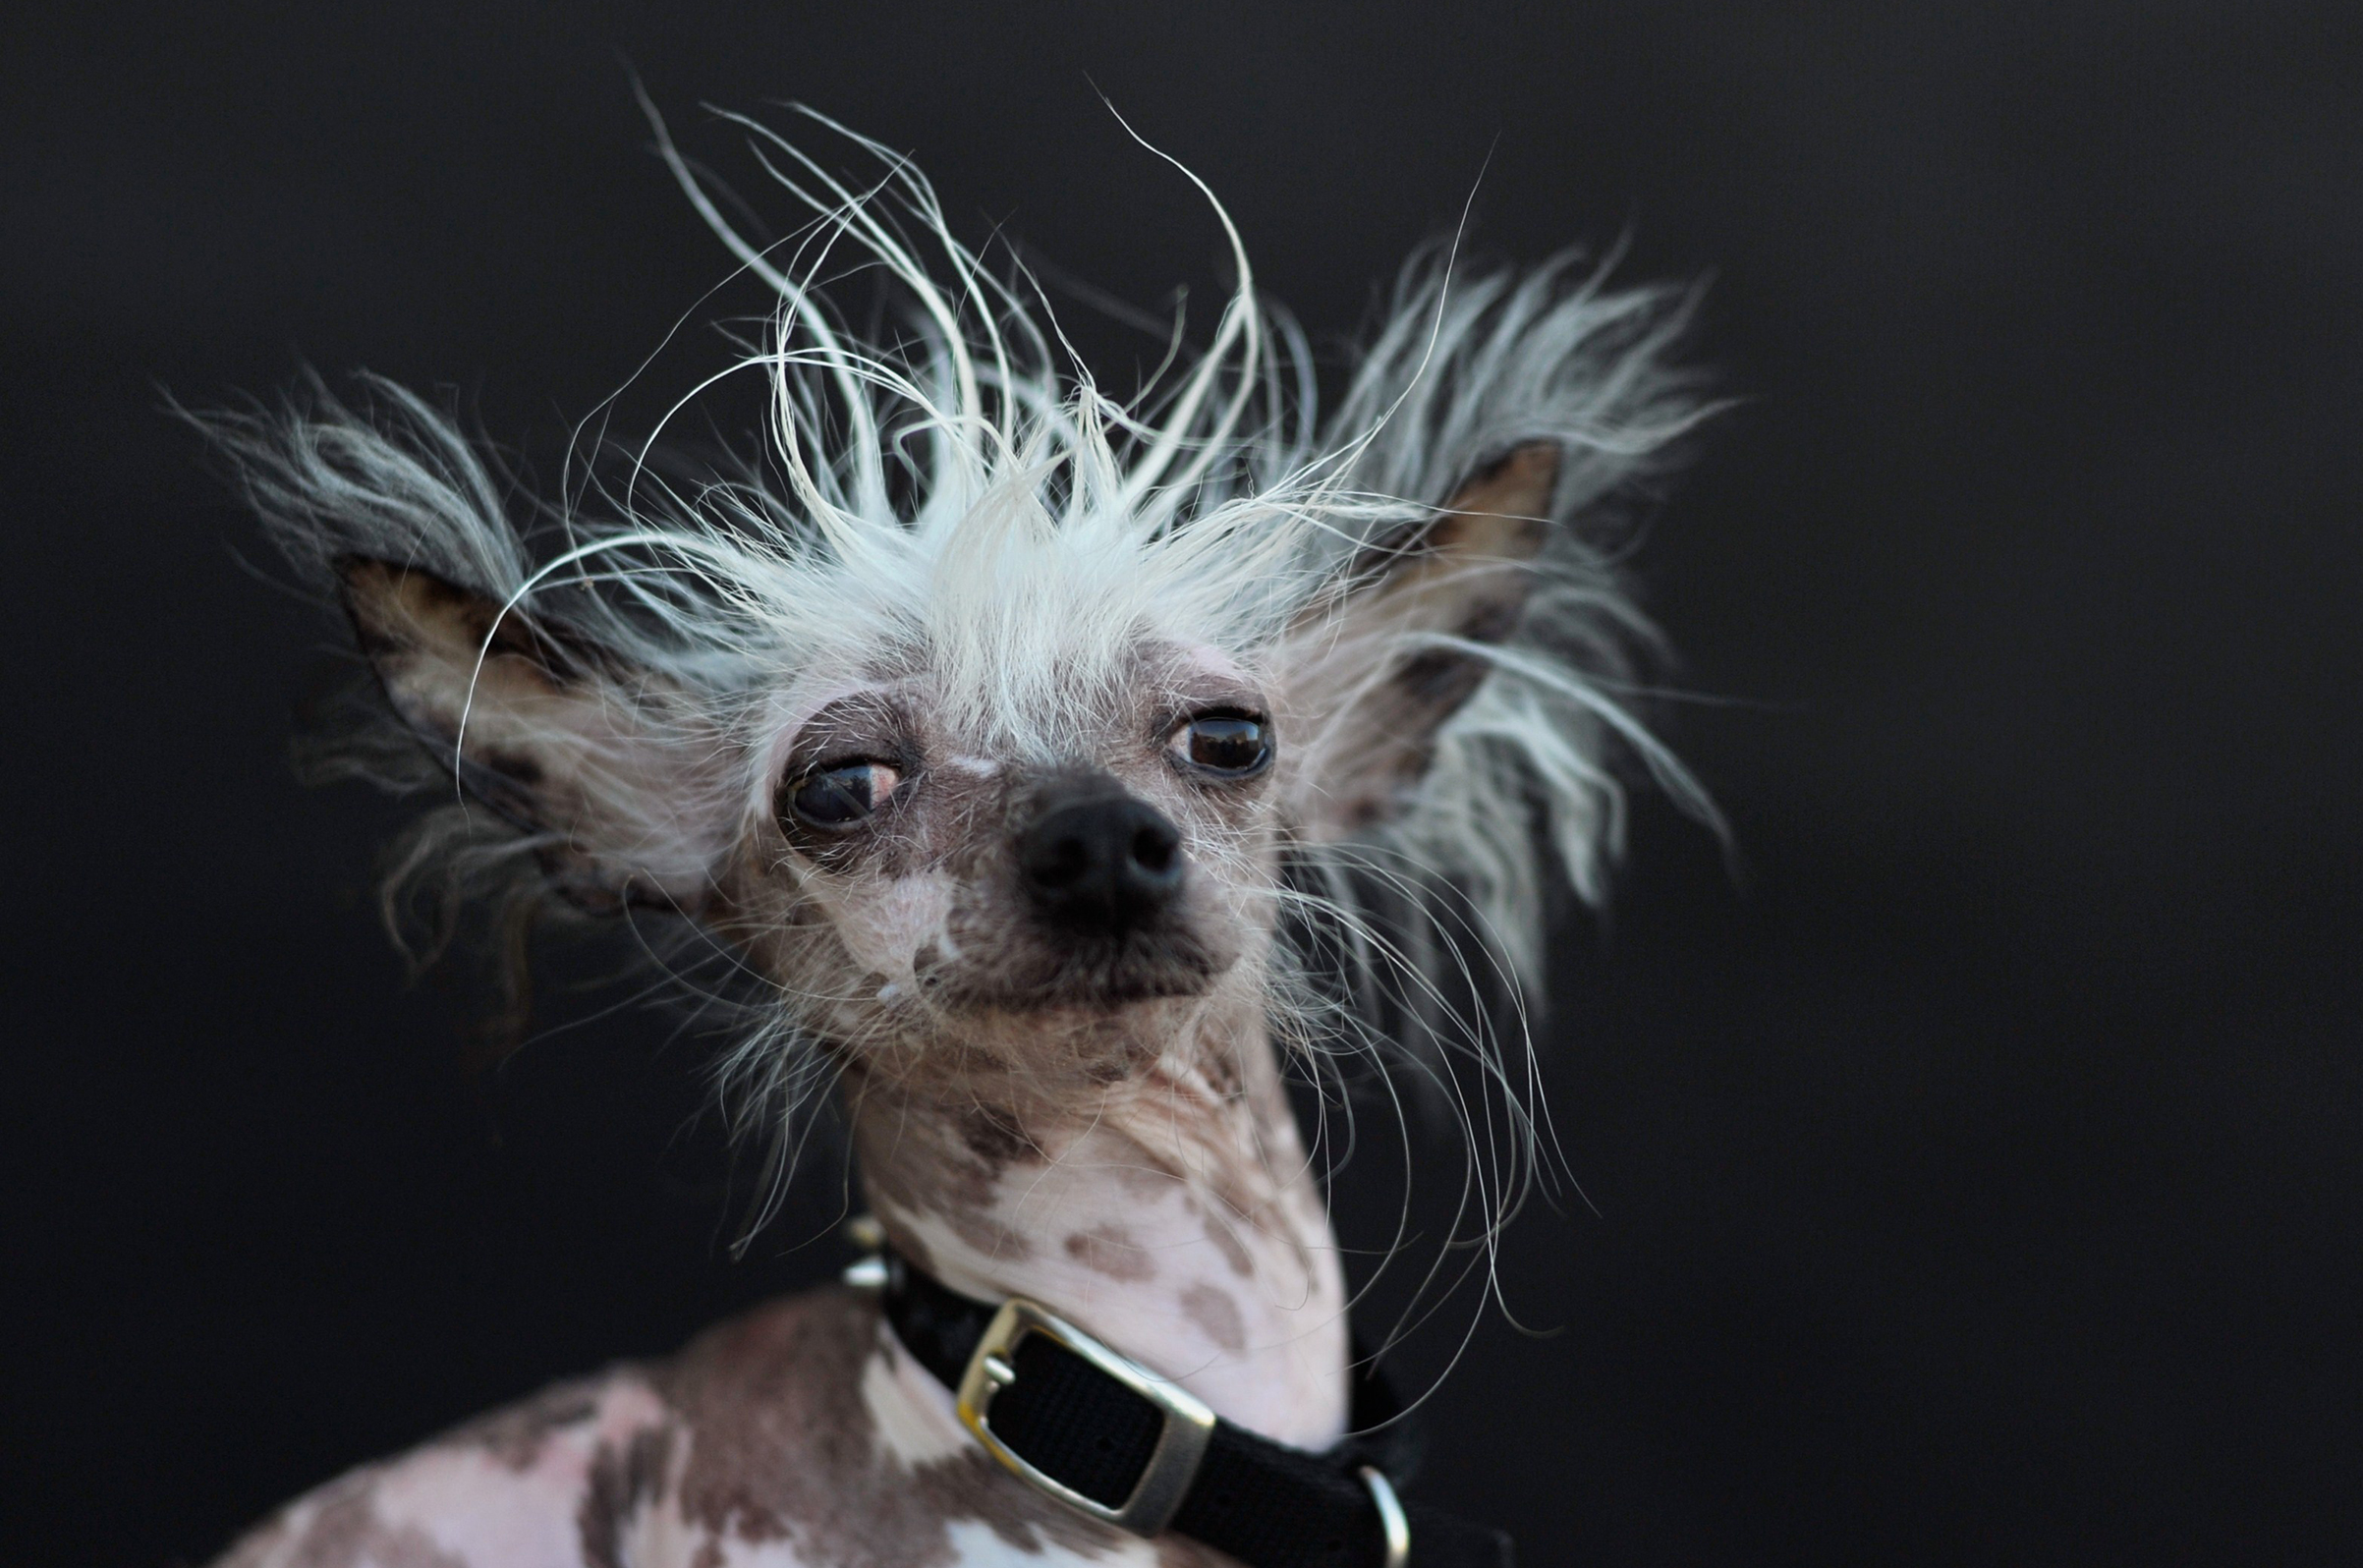 Rascal, a Chinese Crested, poses for a portrait after competing in the World's Ugliest Dog Competition in Petaluma, Calif. on June 26, 2015.